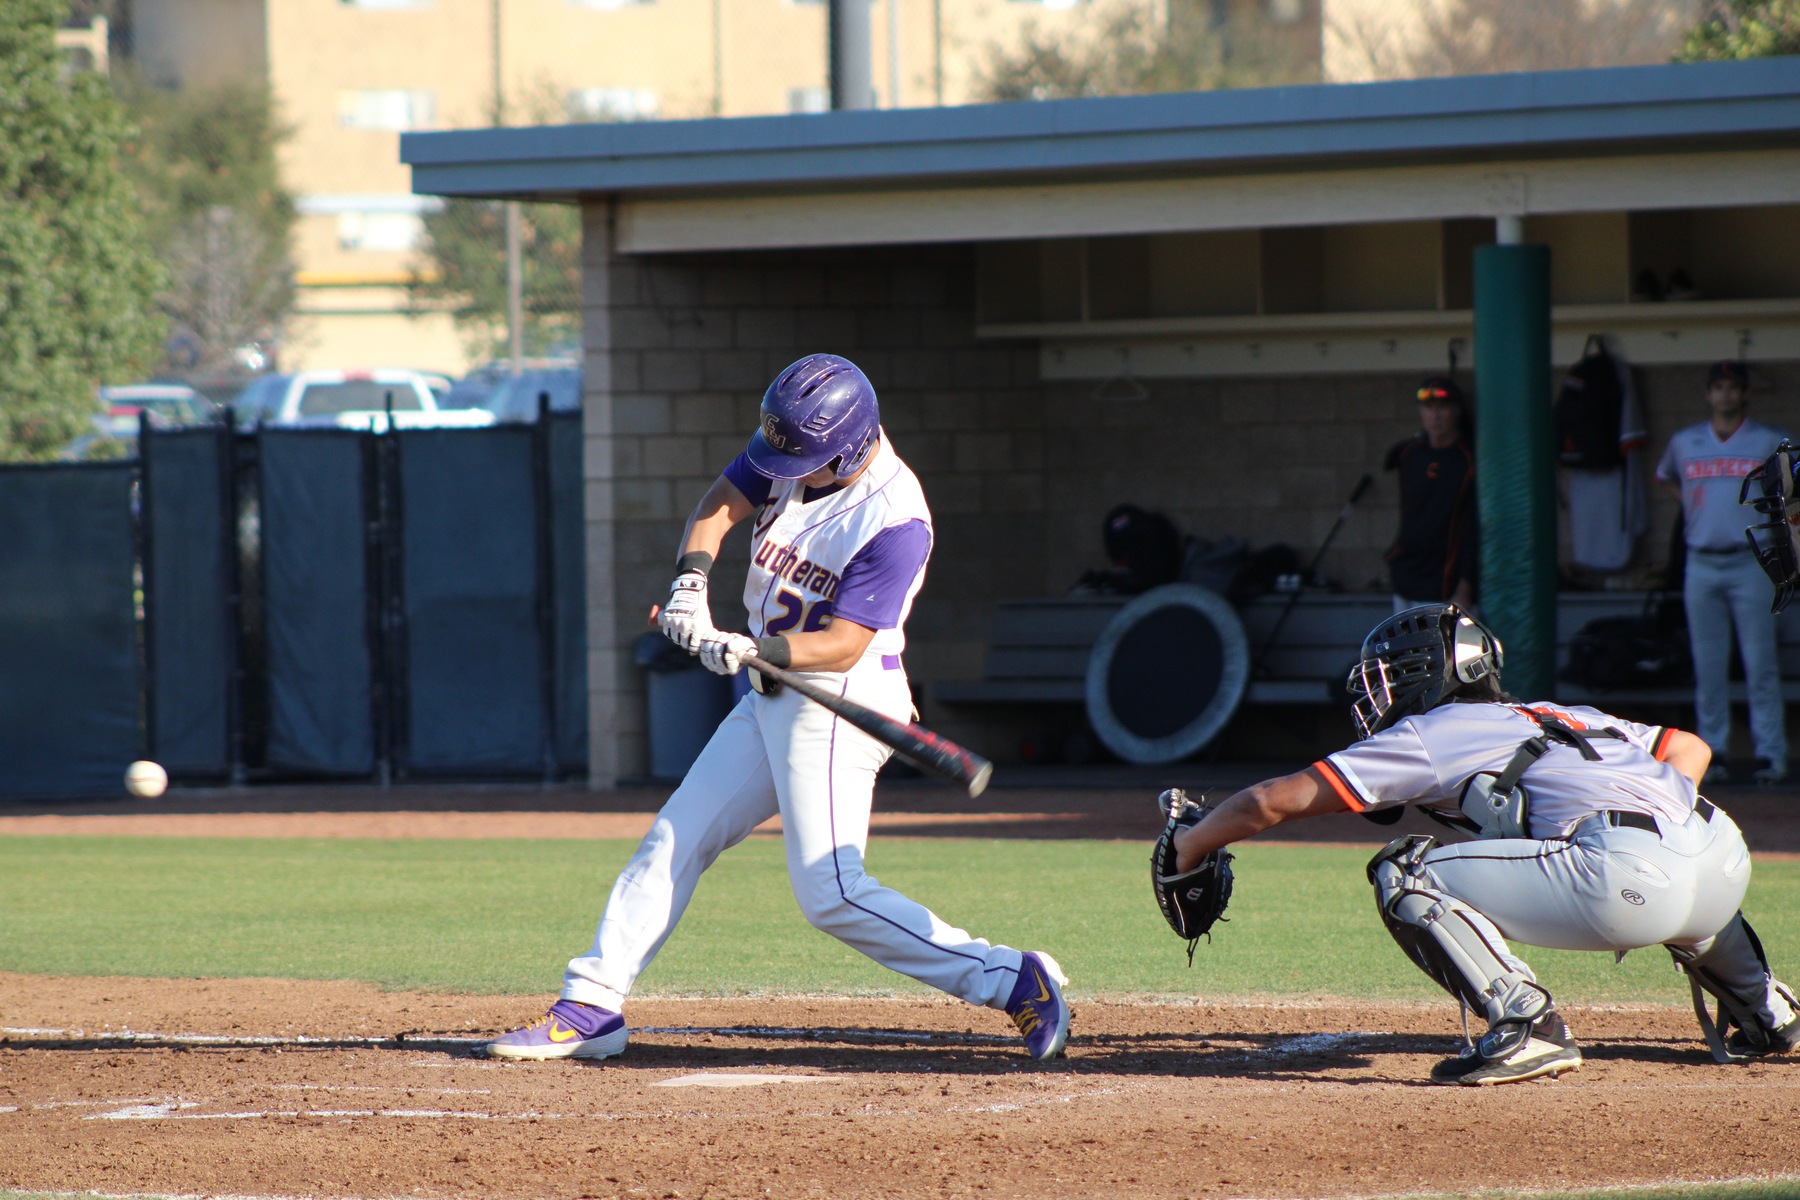 Austin Carrillo racked up three doubles in Cal Lutheran's 21-0 win over Caltech. (Photo Credit: Mariah Zermeno)